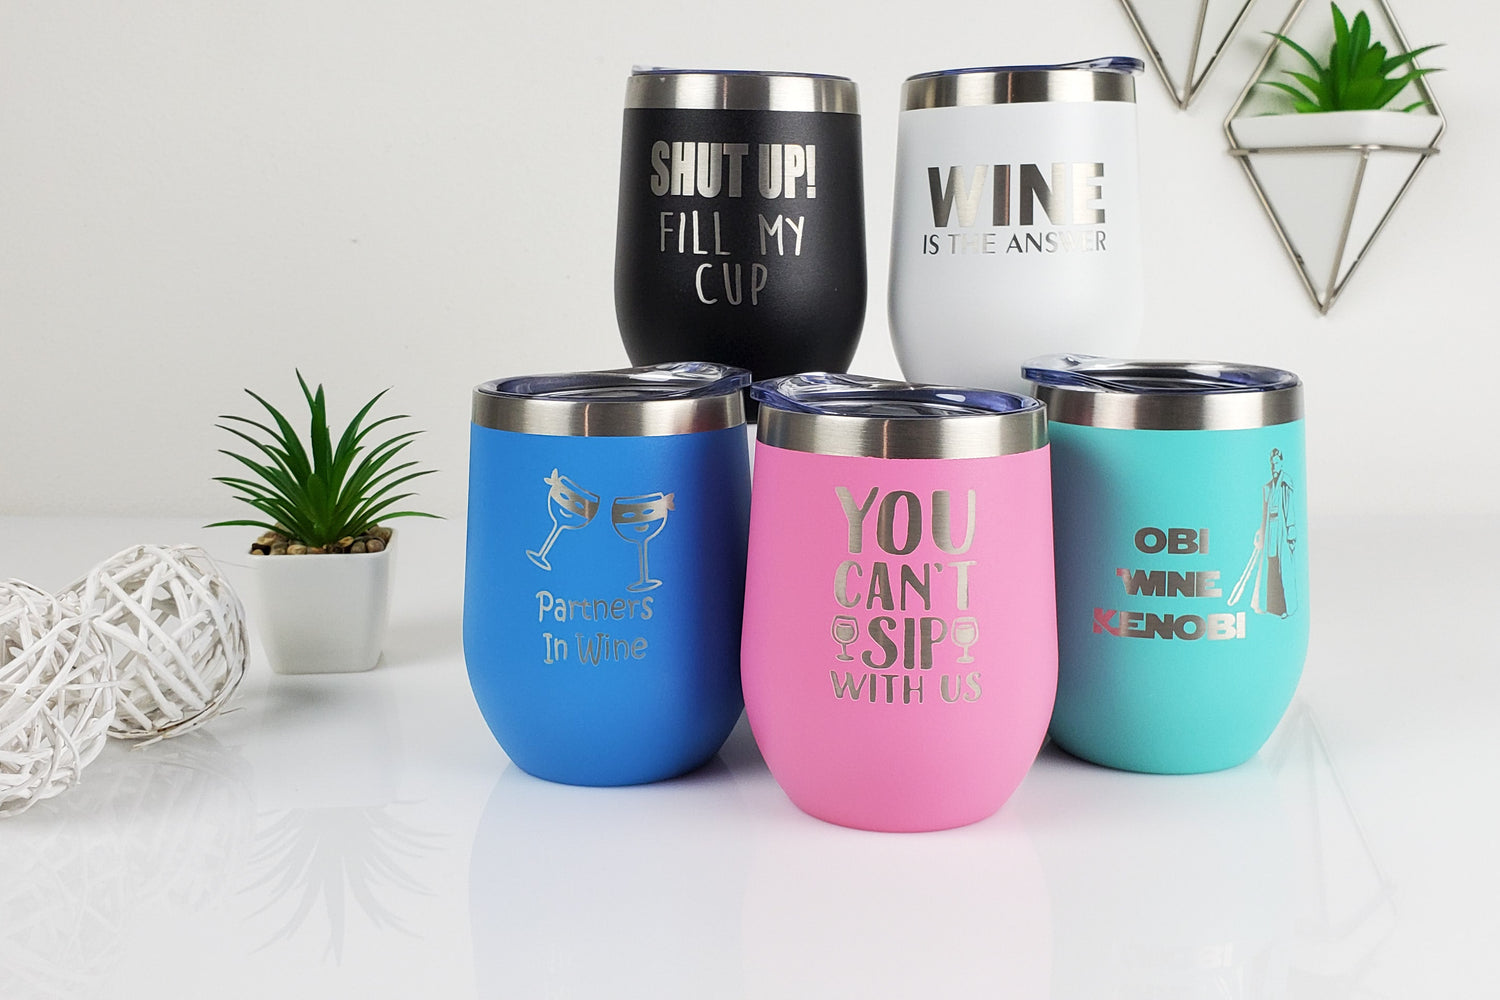 12oz Wine Tumblers with Funny Quotes – CRU CUPS